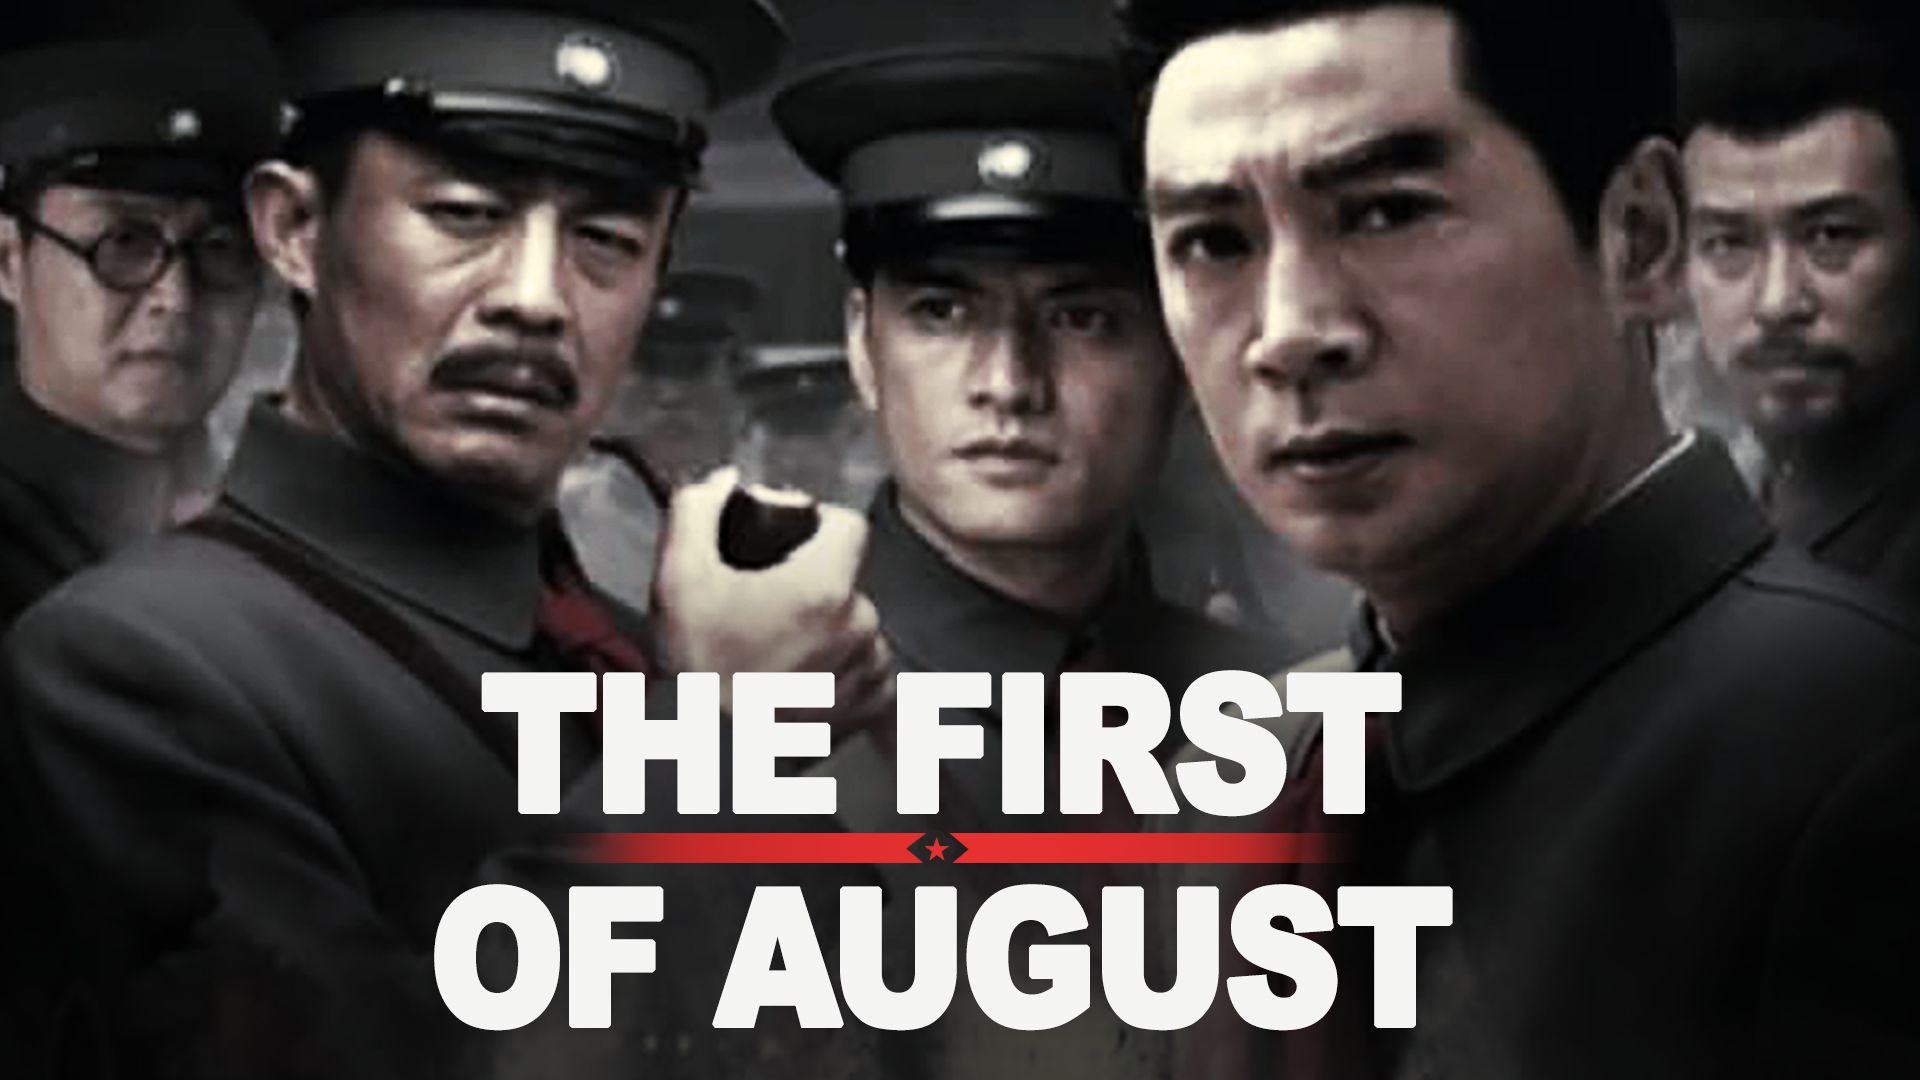 The First of August